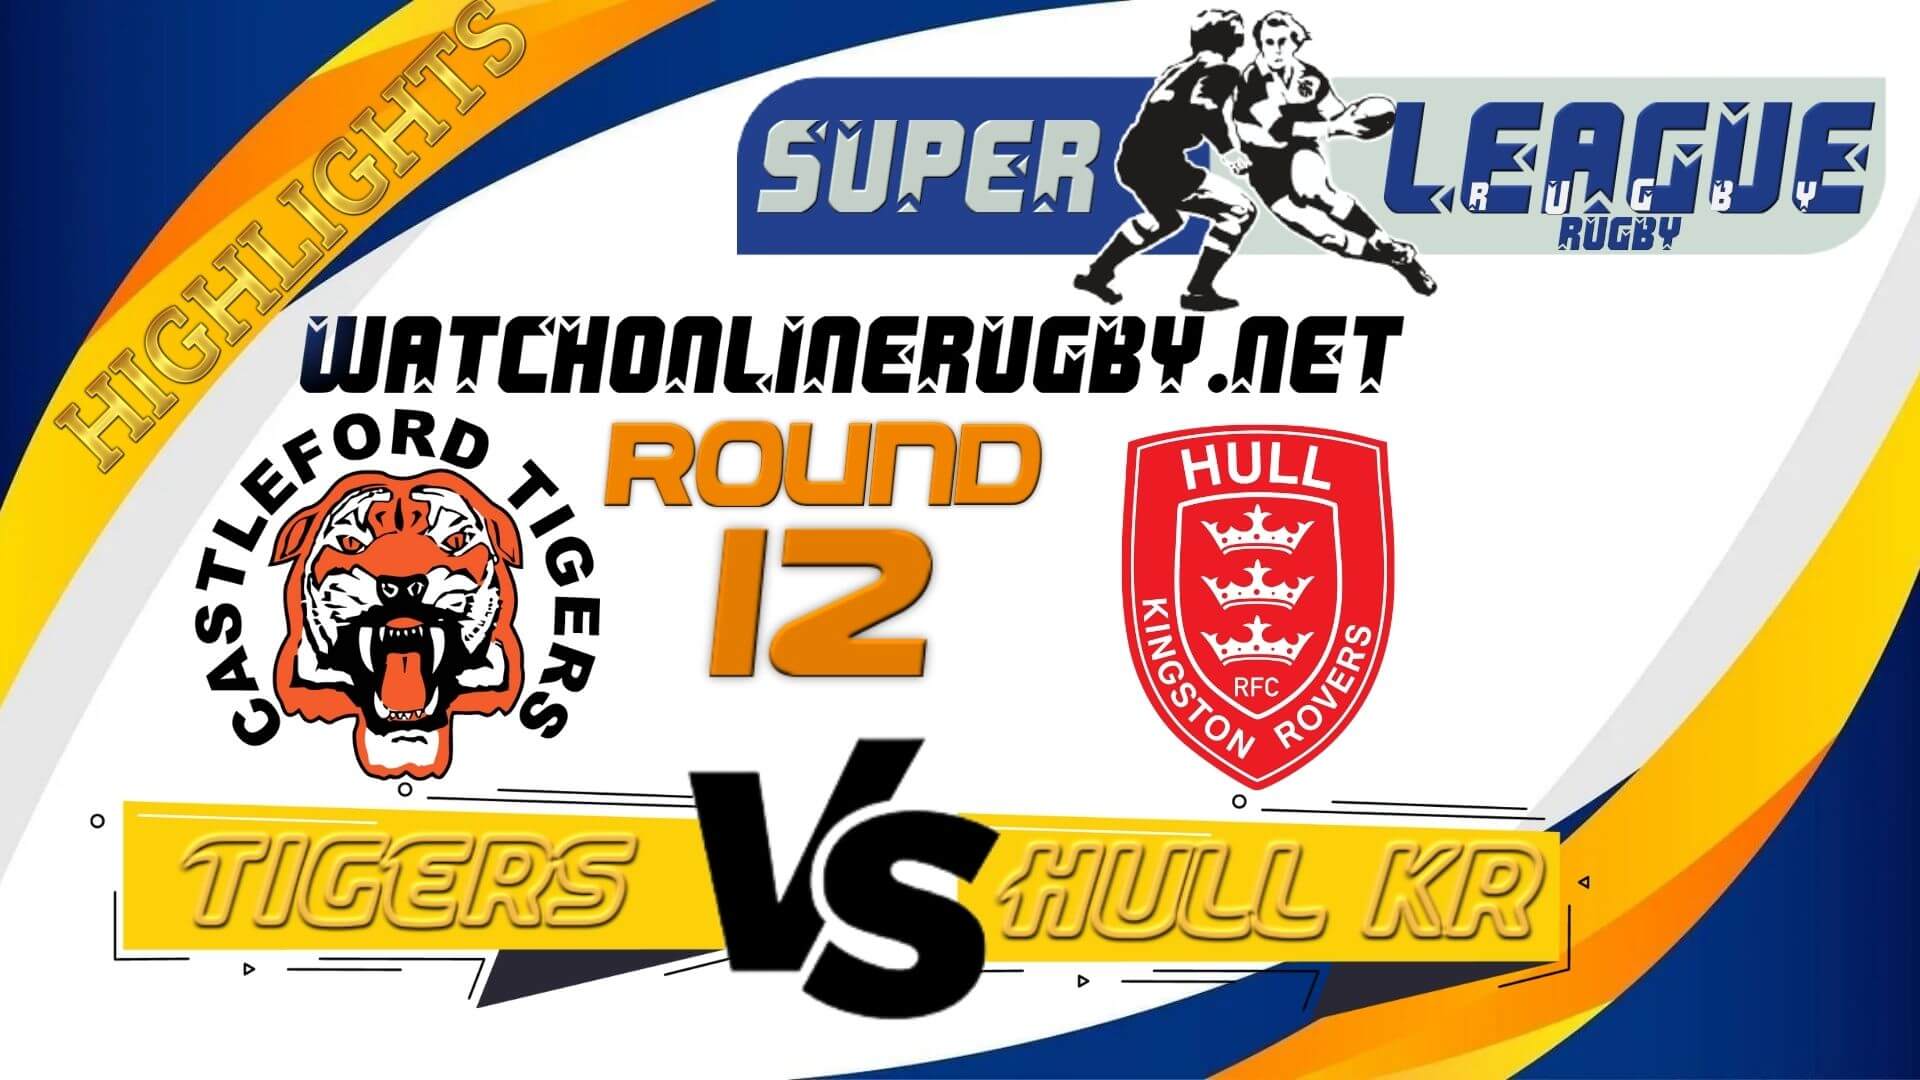 Castleford Tigers Vs Hull KR Super League Rugby 2022 RD 12